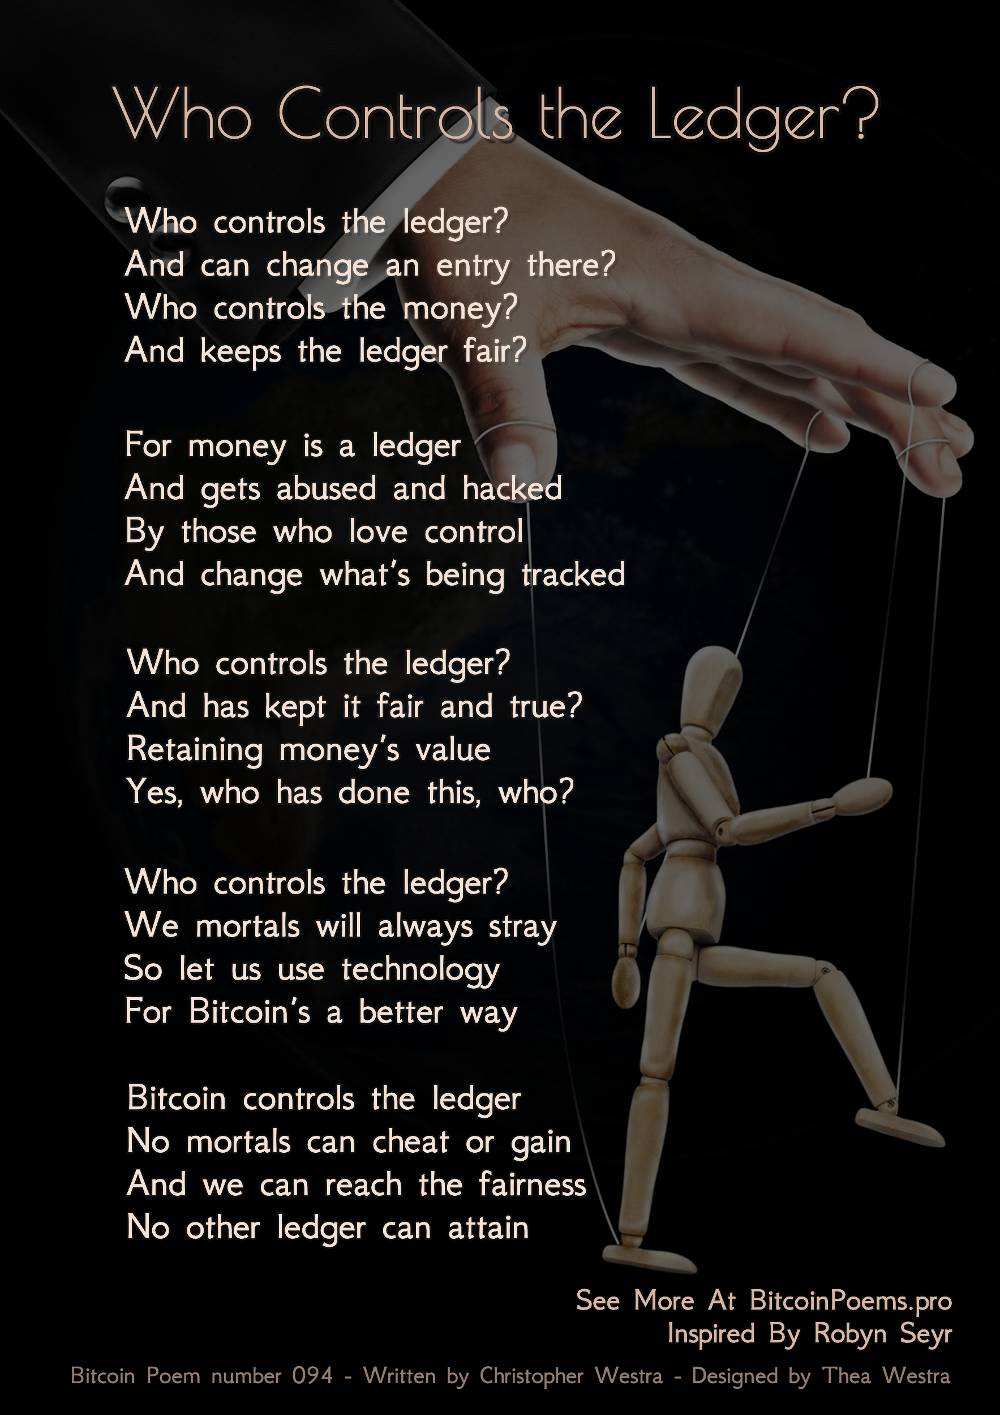 Who Controls the Ledger? - Bitcoin Poem 094 by Christopher Westra